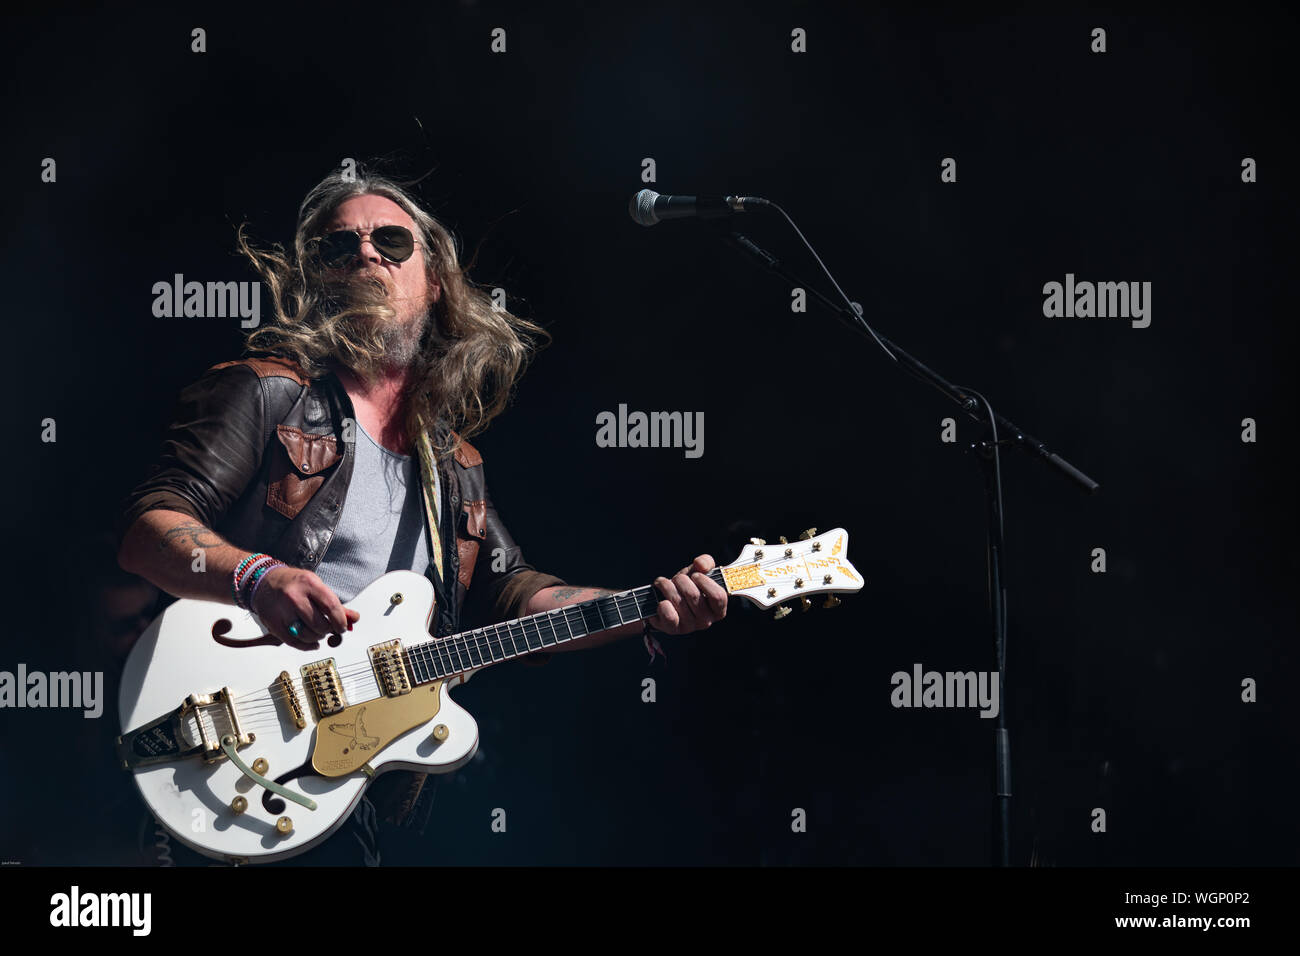 israel nash at end of the road 2019 Stock Photo